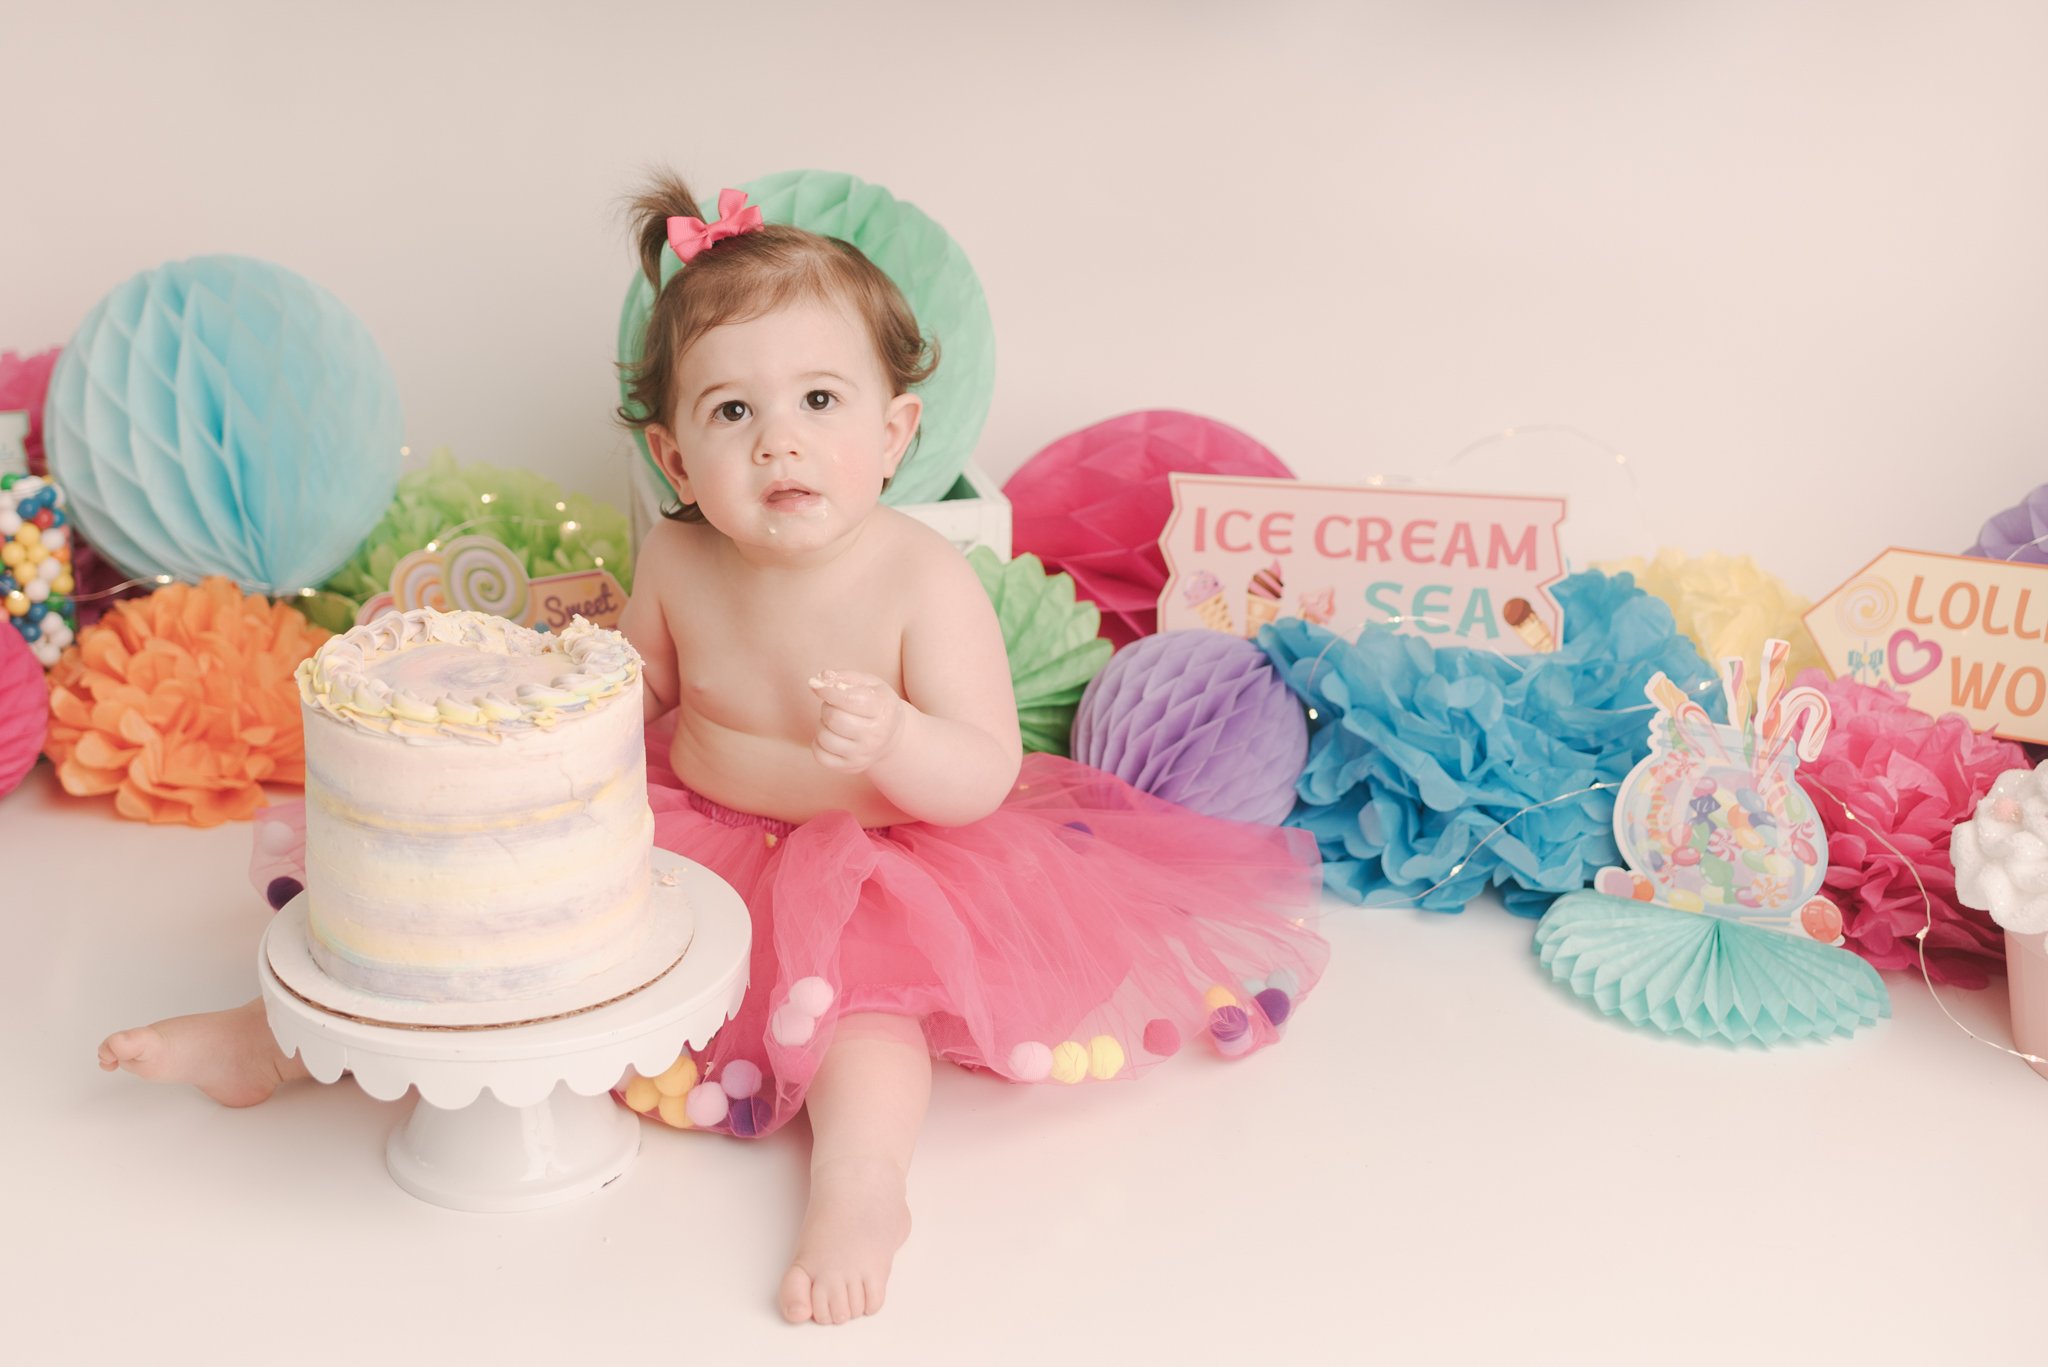 Sweet_one_Candyland_Frist_Birthday_Girl_Smash_and_Splash_Session_Cake_Studio_by_Erika_Child_and_Family_Photographer_for_Christie_Leigh_Photo_in_Austintown_OH_Ohio_Trumbull_County_003.jpg